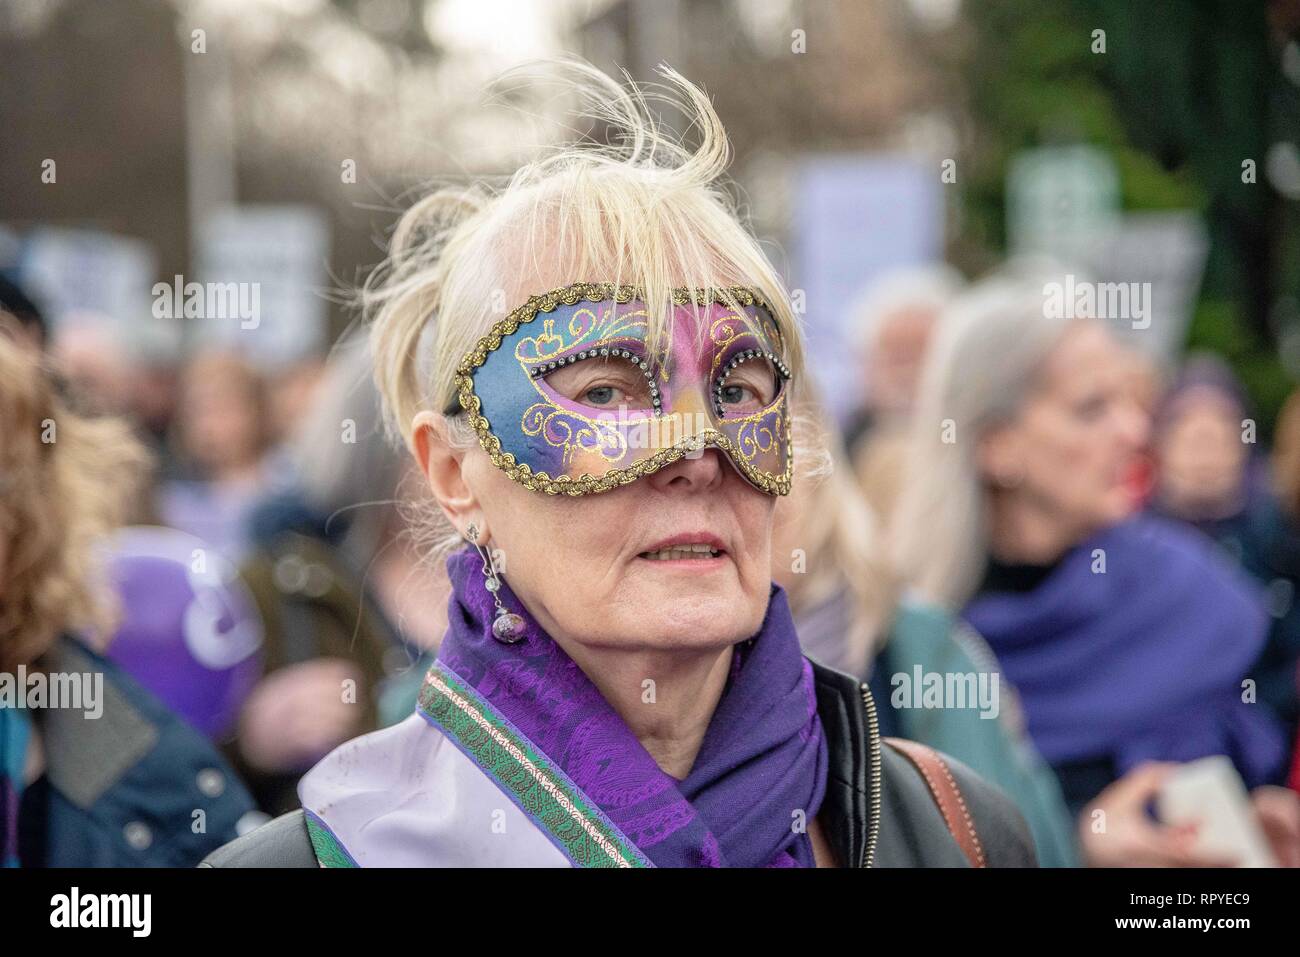 A masked protester seen during the demonstration. Protesters from all over Scotland took part in a protest against the changes in the state pension for women. WASPI (Women Against State Pension Injustice) and several other groups took to the streets in protest over it. Stock Photo